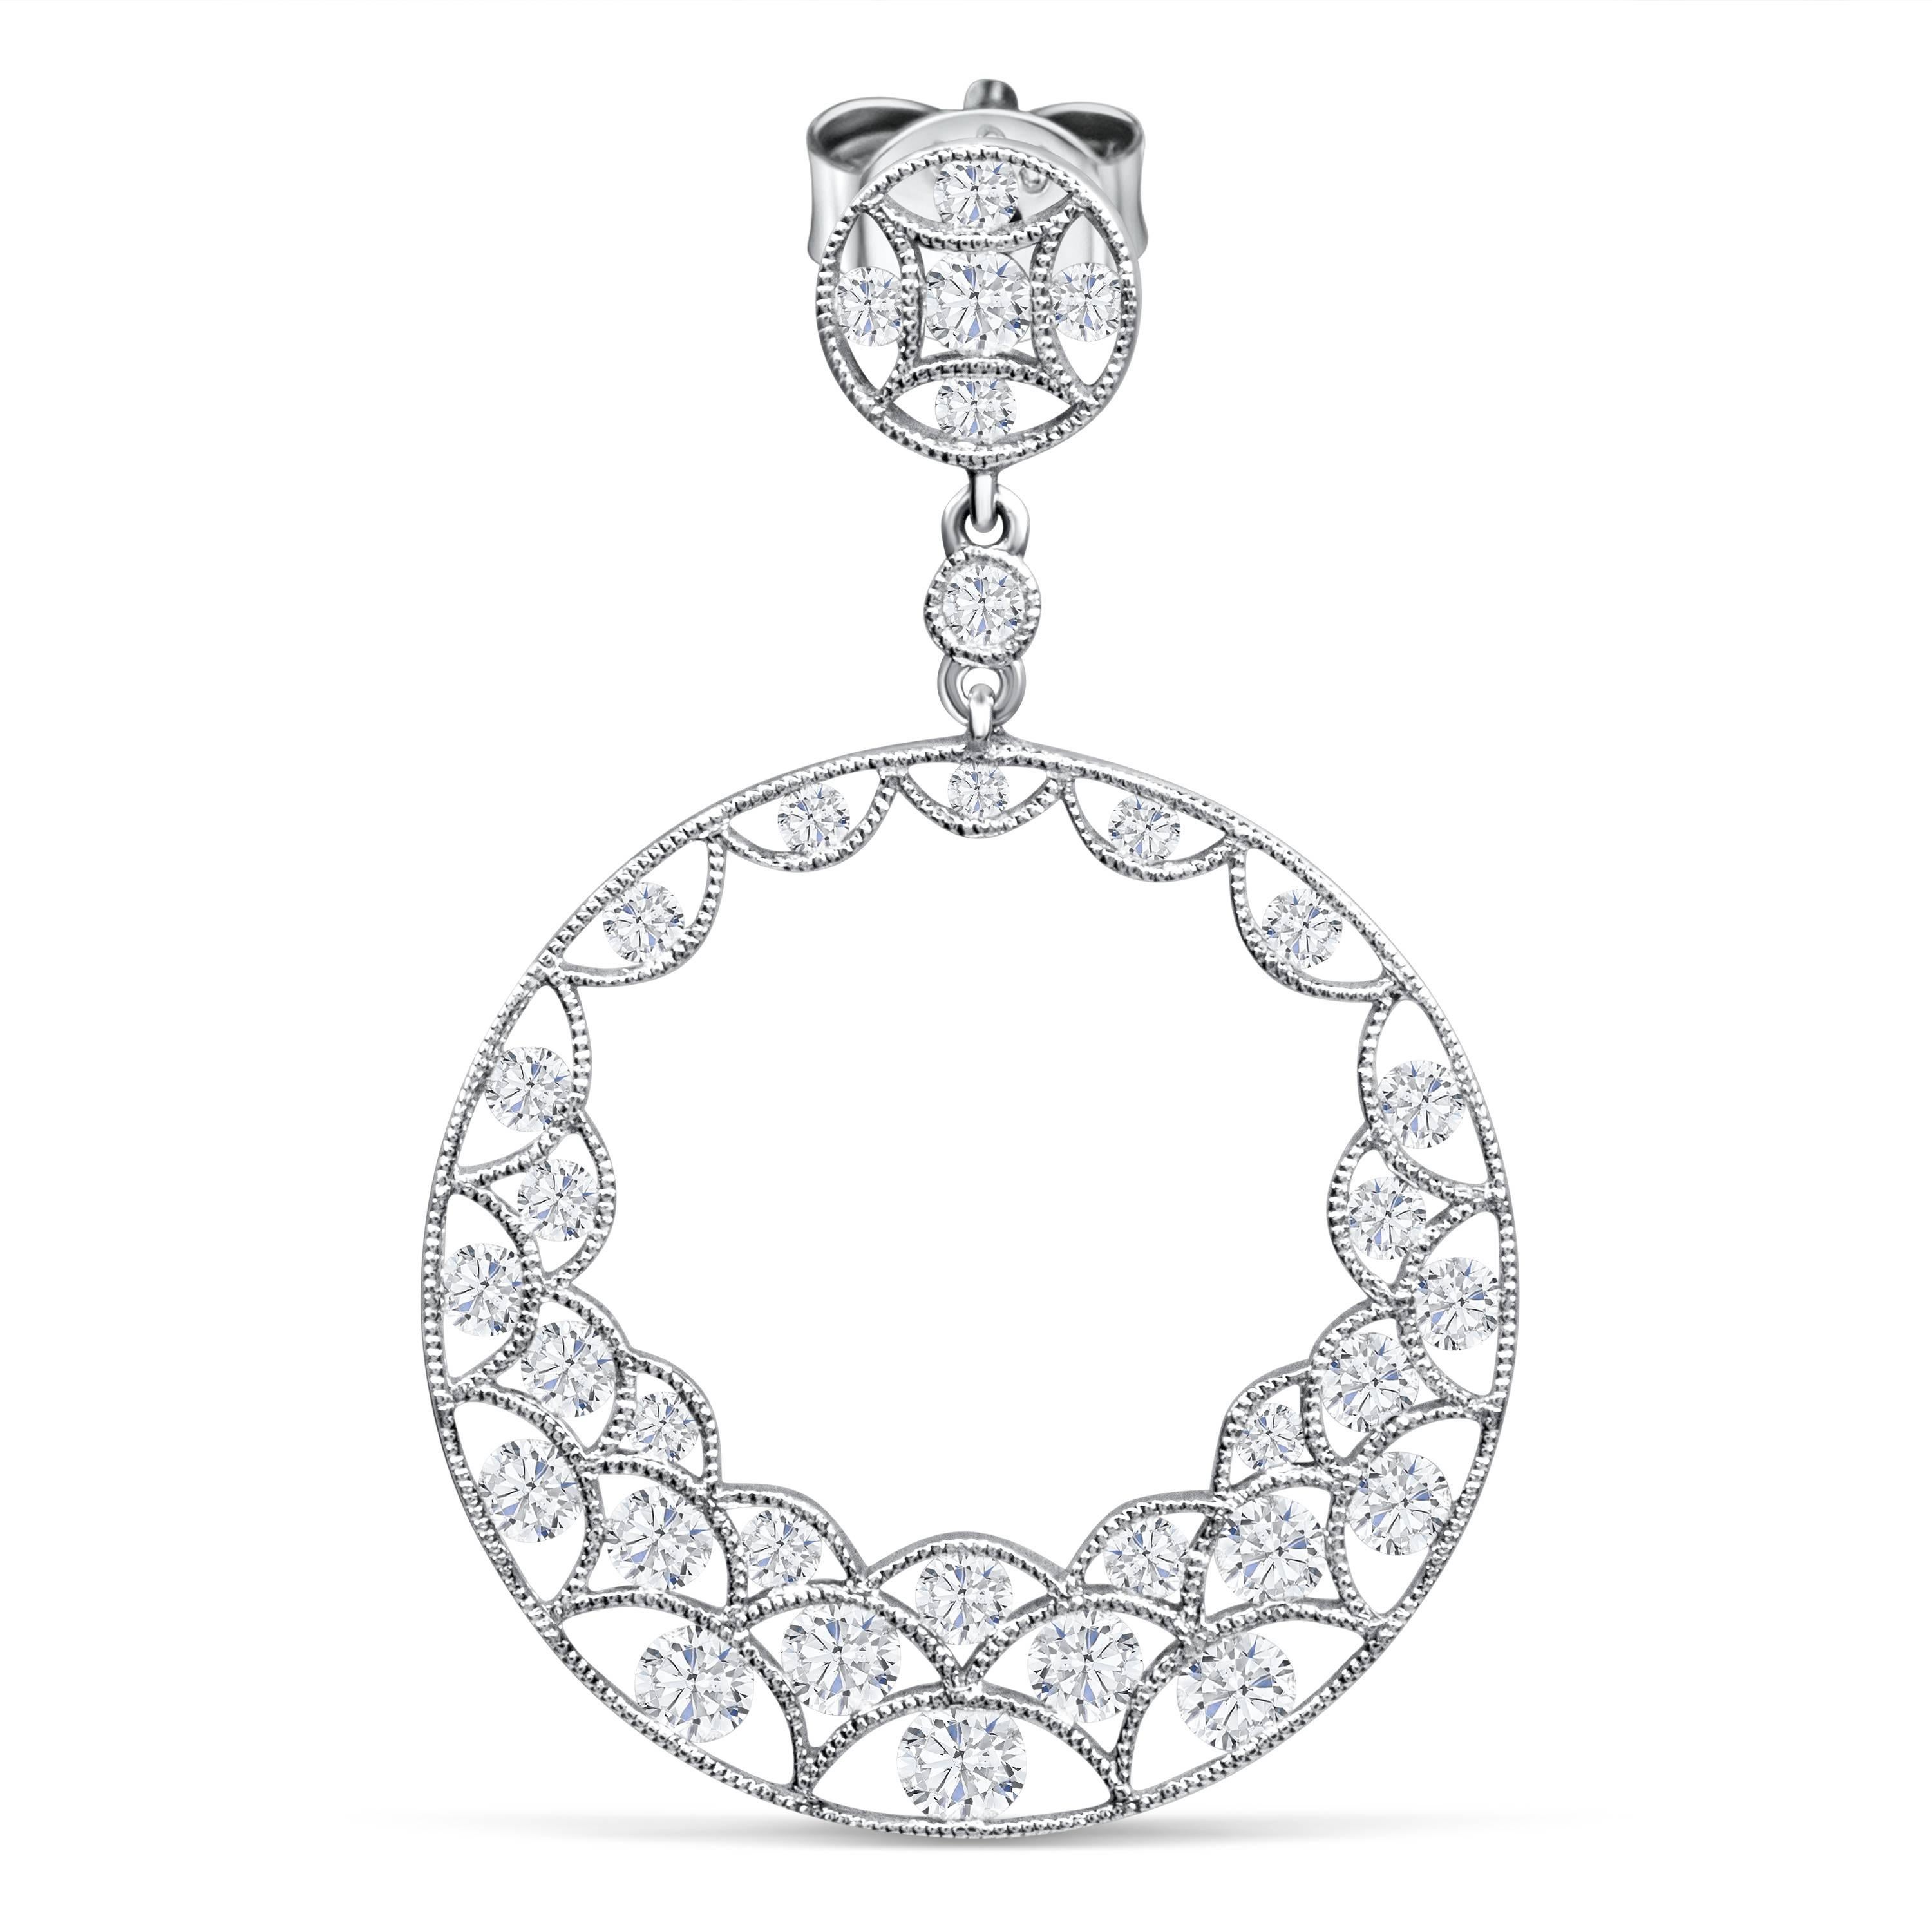 A chic and distinct dangle open-work design earrings showcasing 2.46 carats total of round brilliant diamonds, set with expertly crafted milgrain edges. Suspended on a creative diamond encrusted front post. Made in 18k white gold. 

Style available